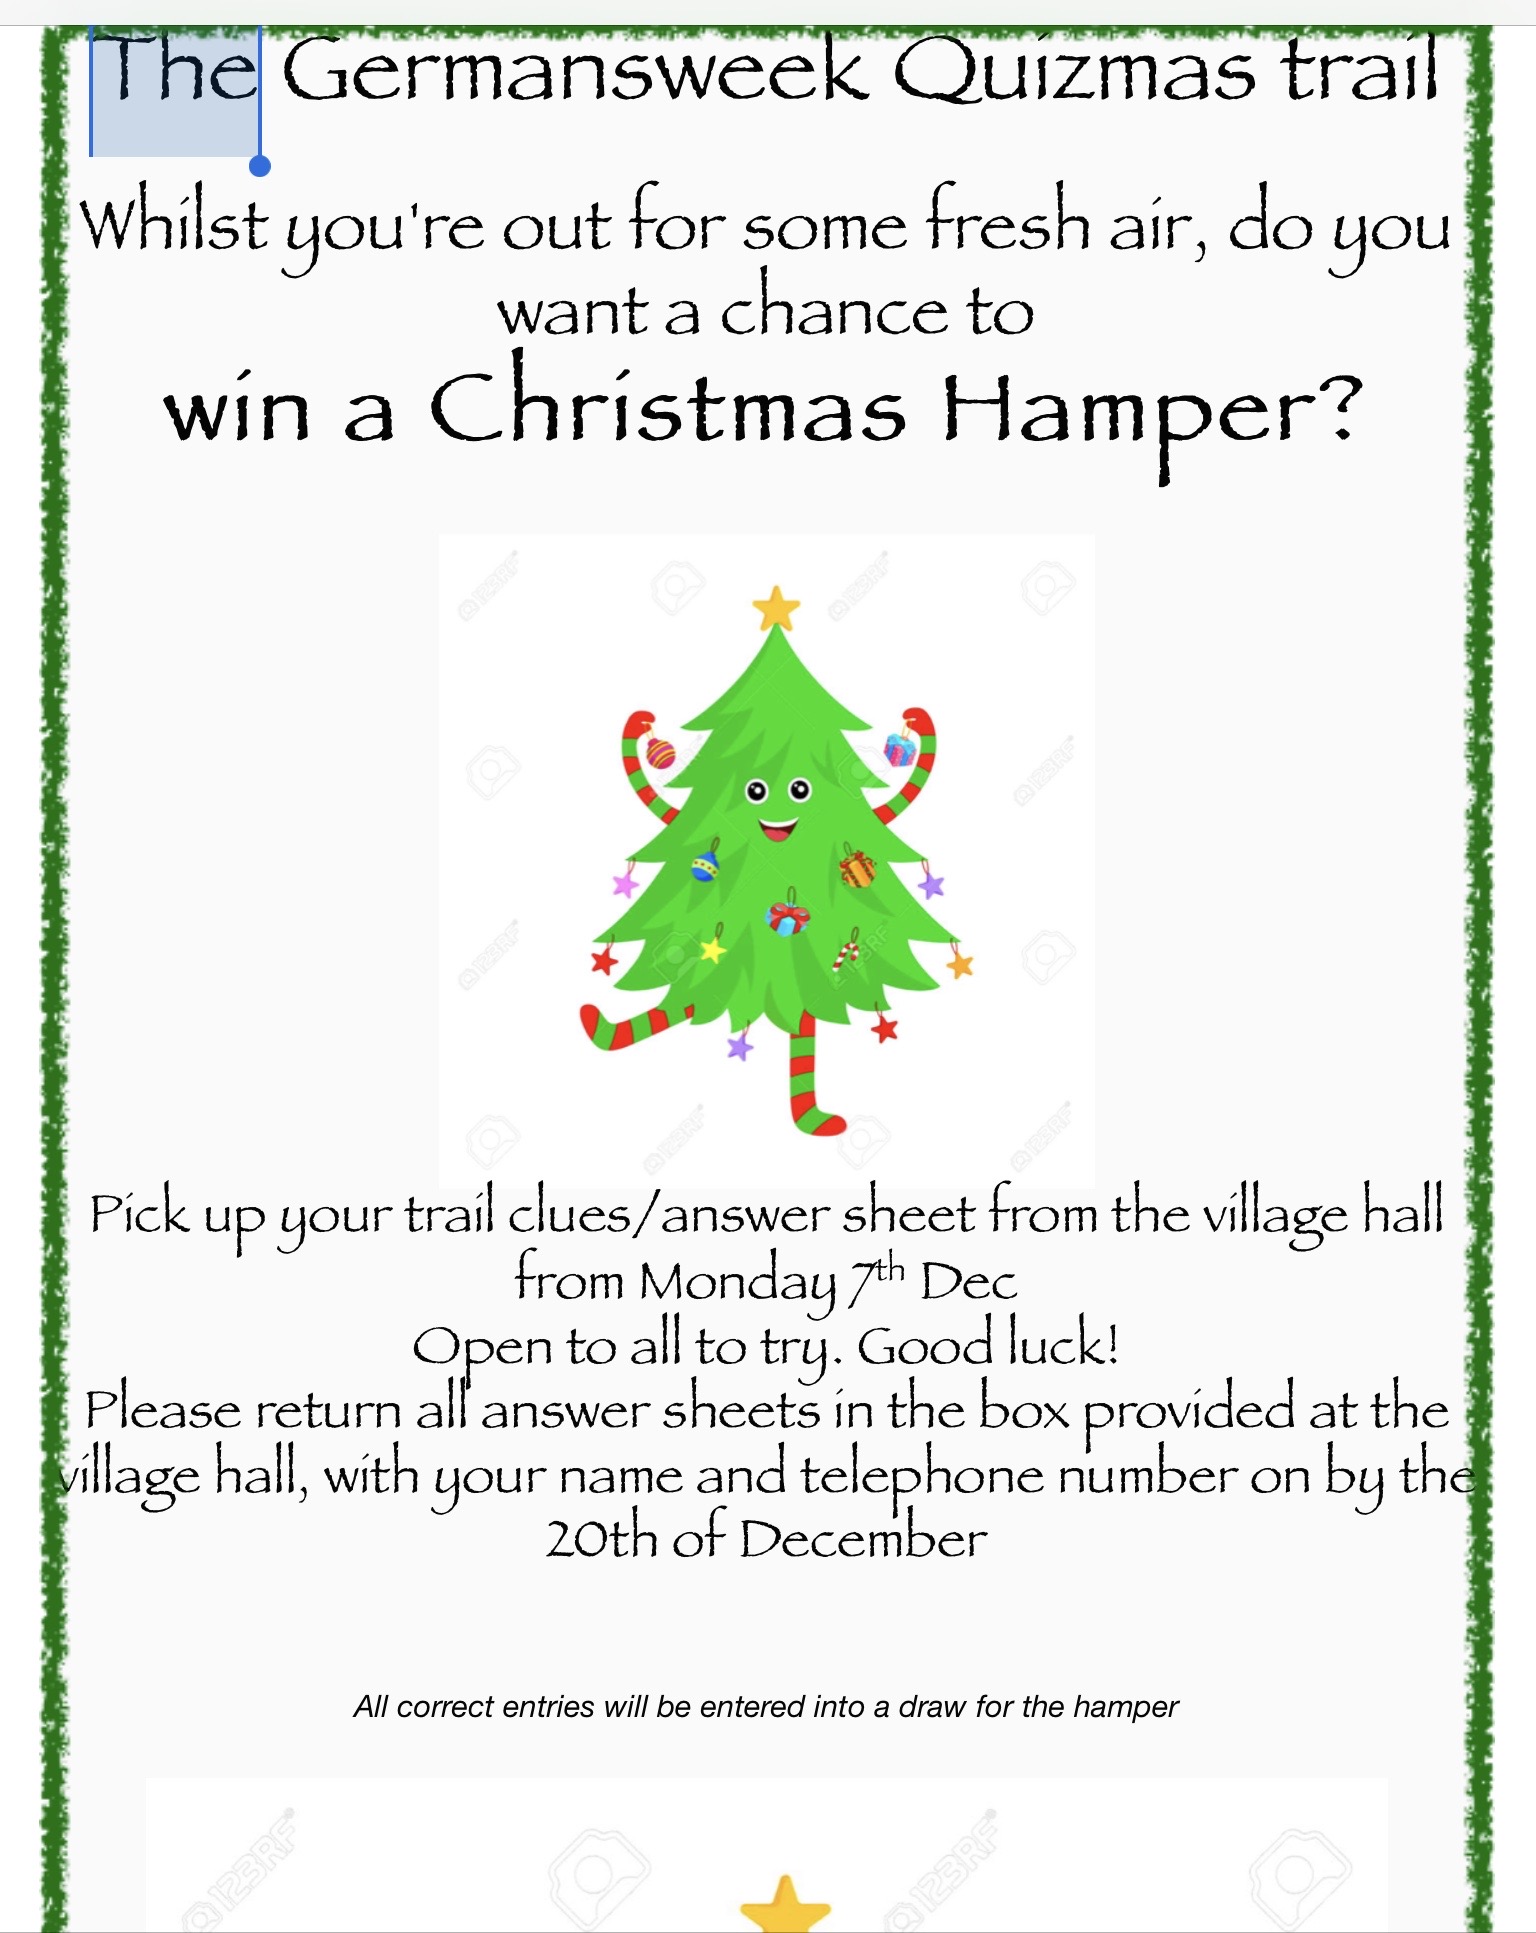 a christmas tree with instuctions: start at the hall, hand in answers by 20th December - correct answer sheets will go into a prize draw. 